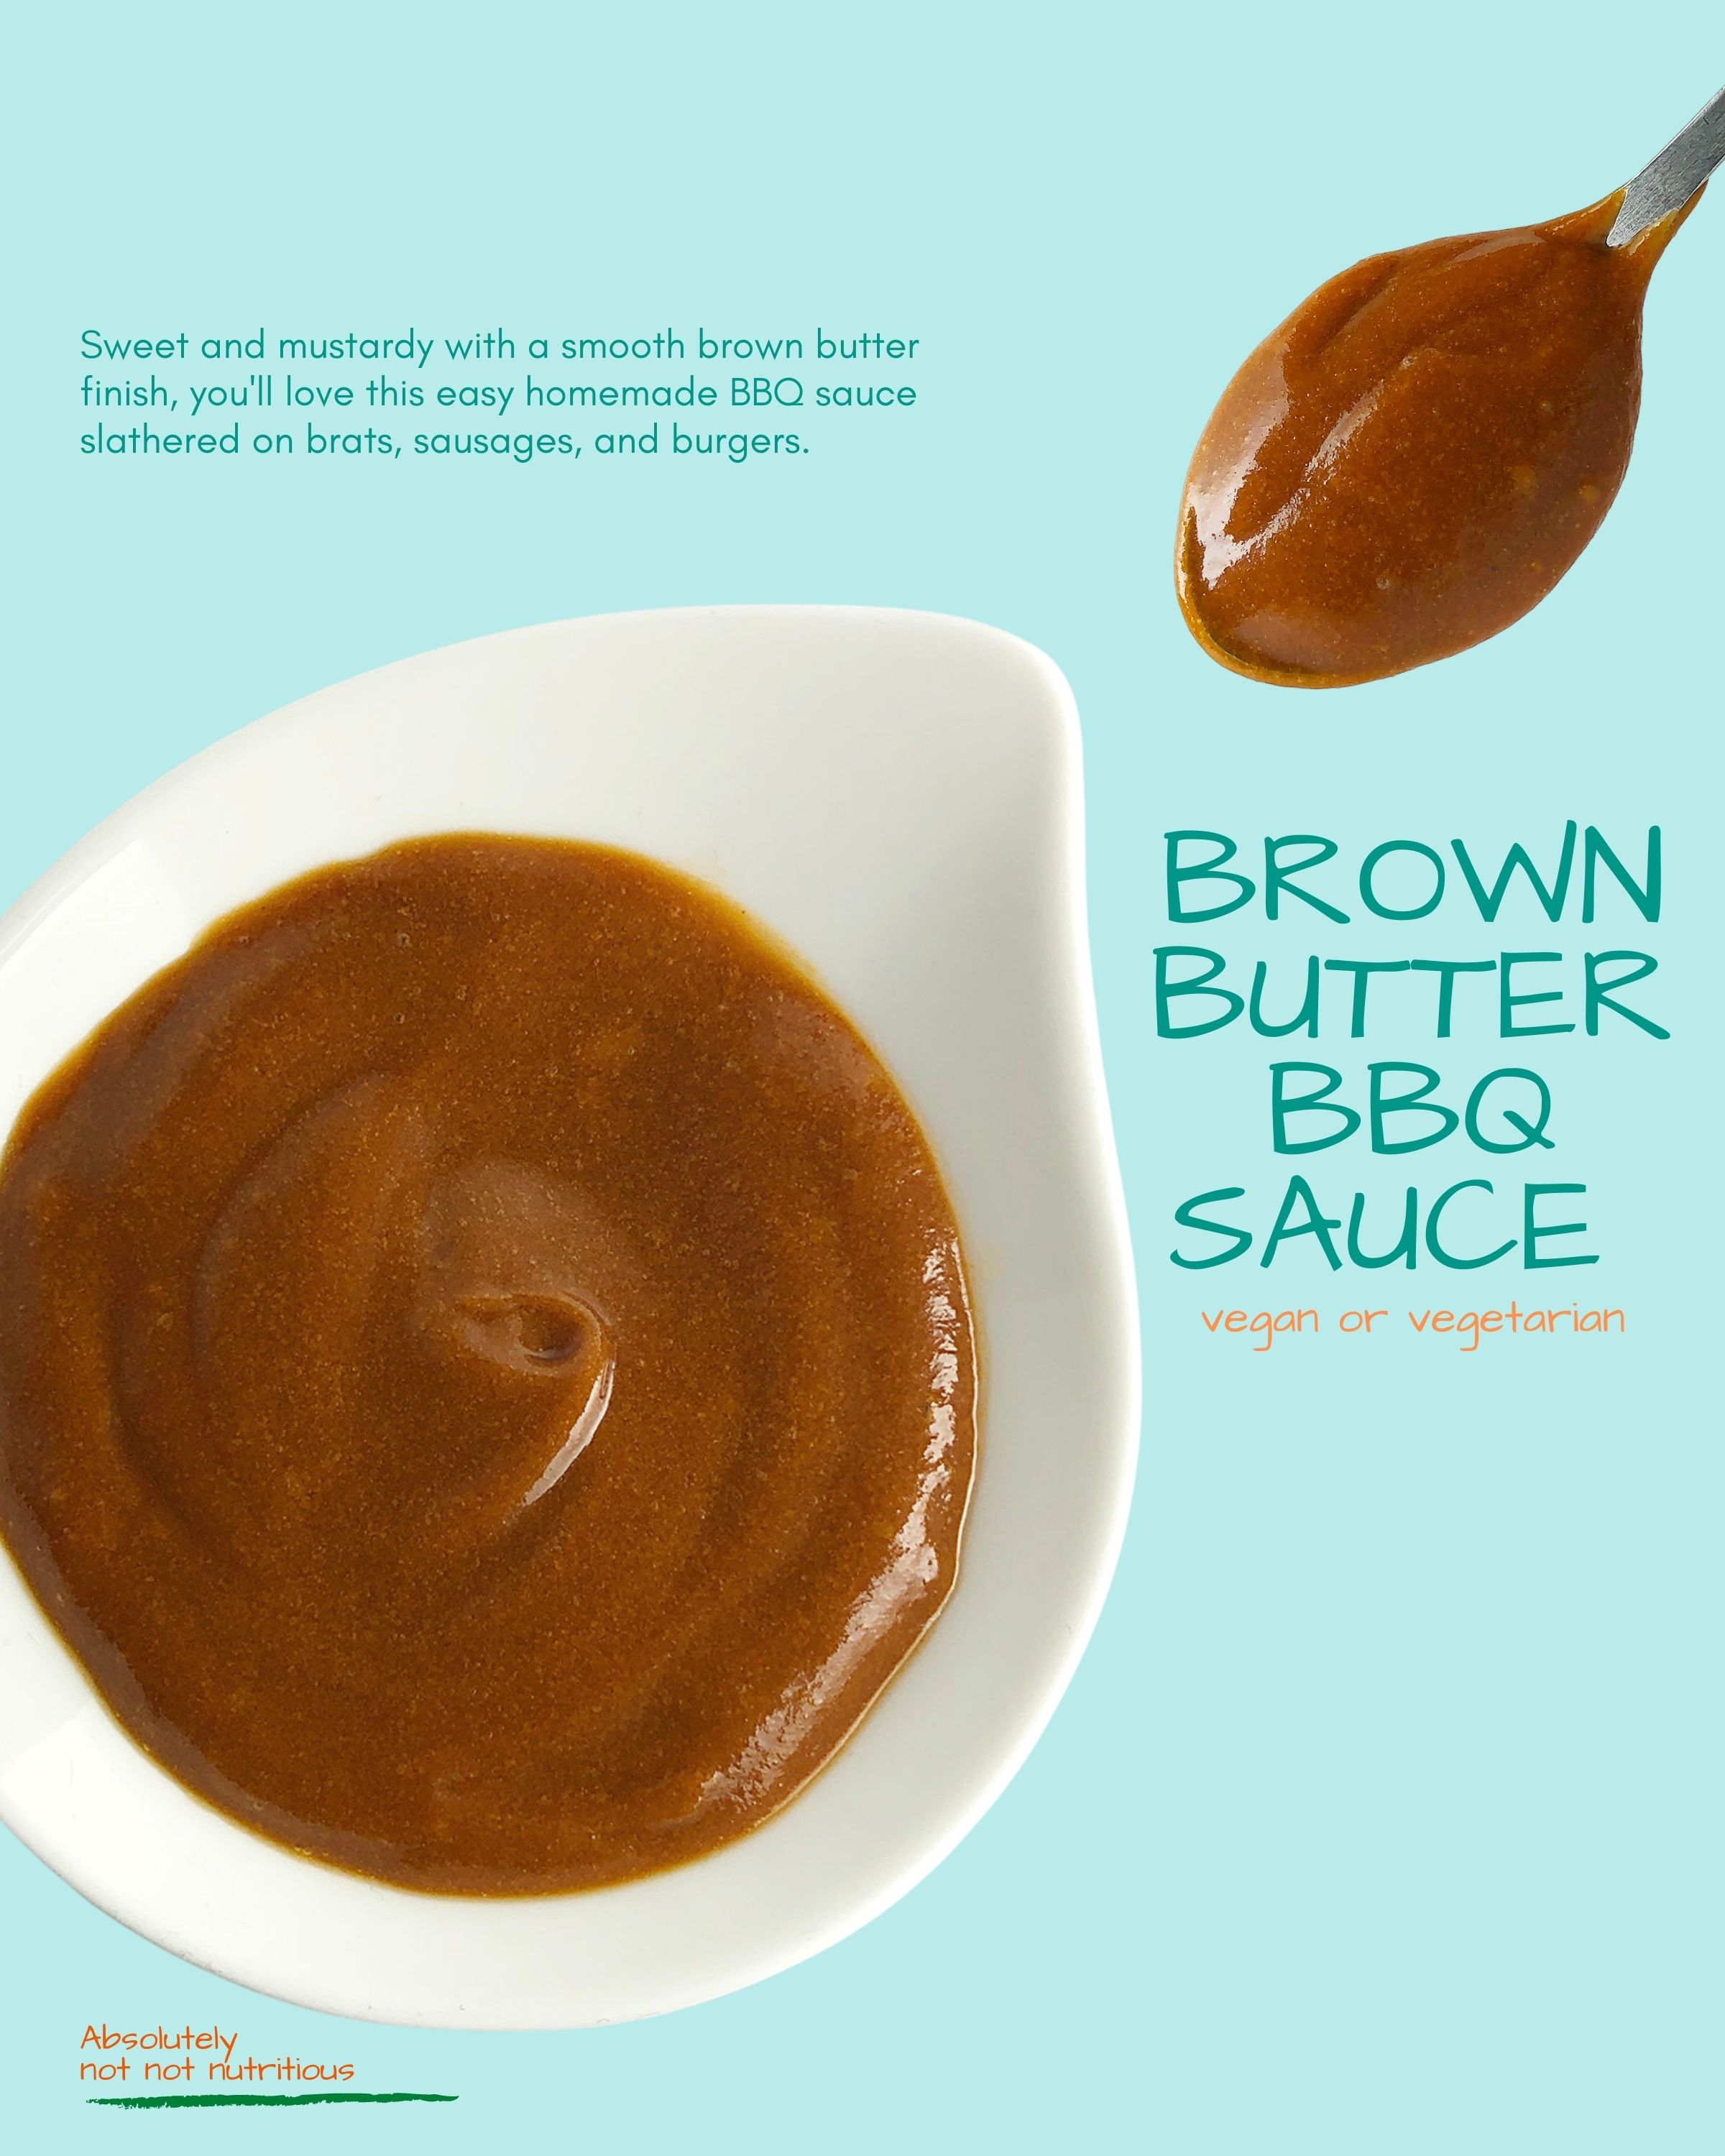 Graphic with spoonful of Brown Butter Barbecue Sauce. Sweet and mustardy with a smooth brown butter finish, you'll love this easy homemade BBQ sauce slathered on brats, sausages, and burgers. 